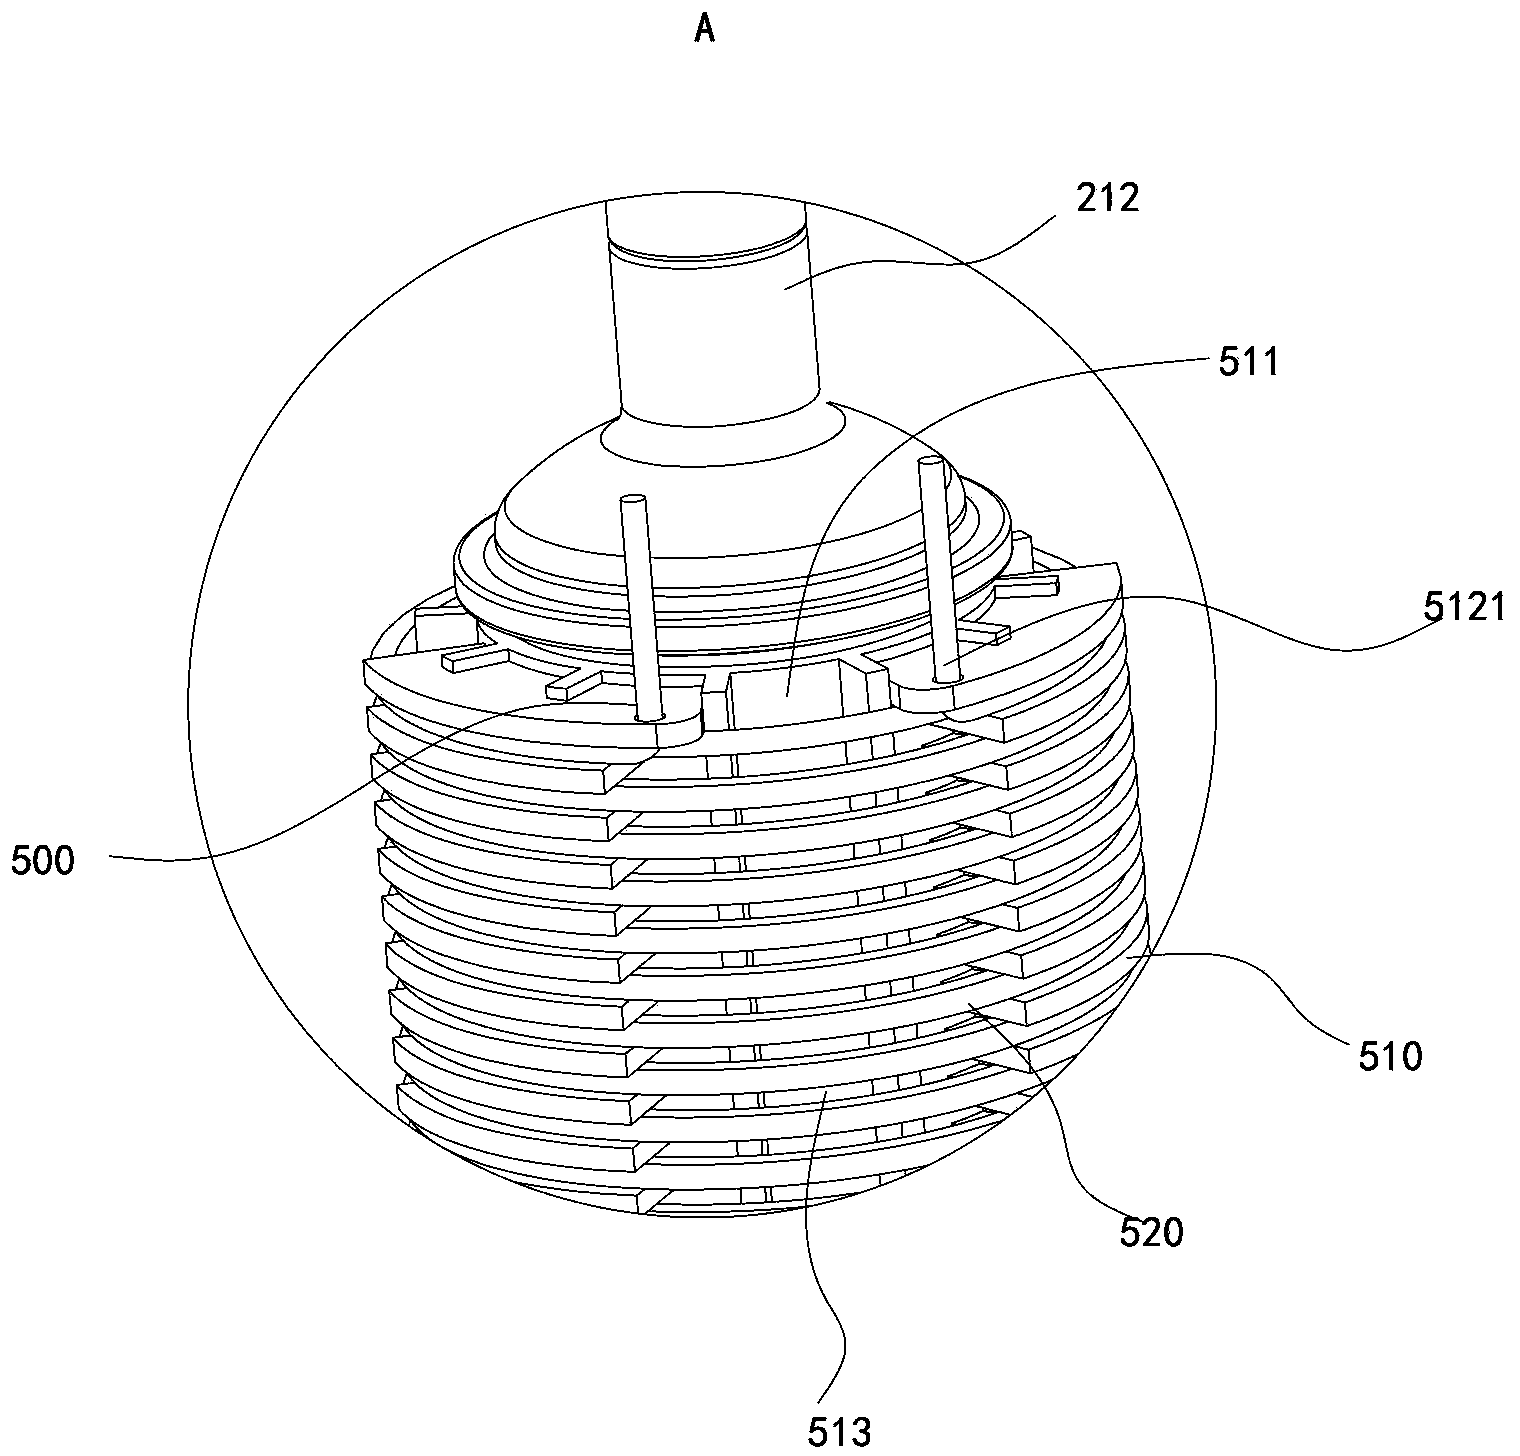 Electromagnetic induction heating device and water dispenser with same